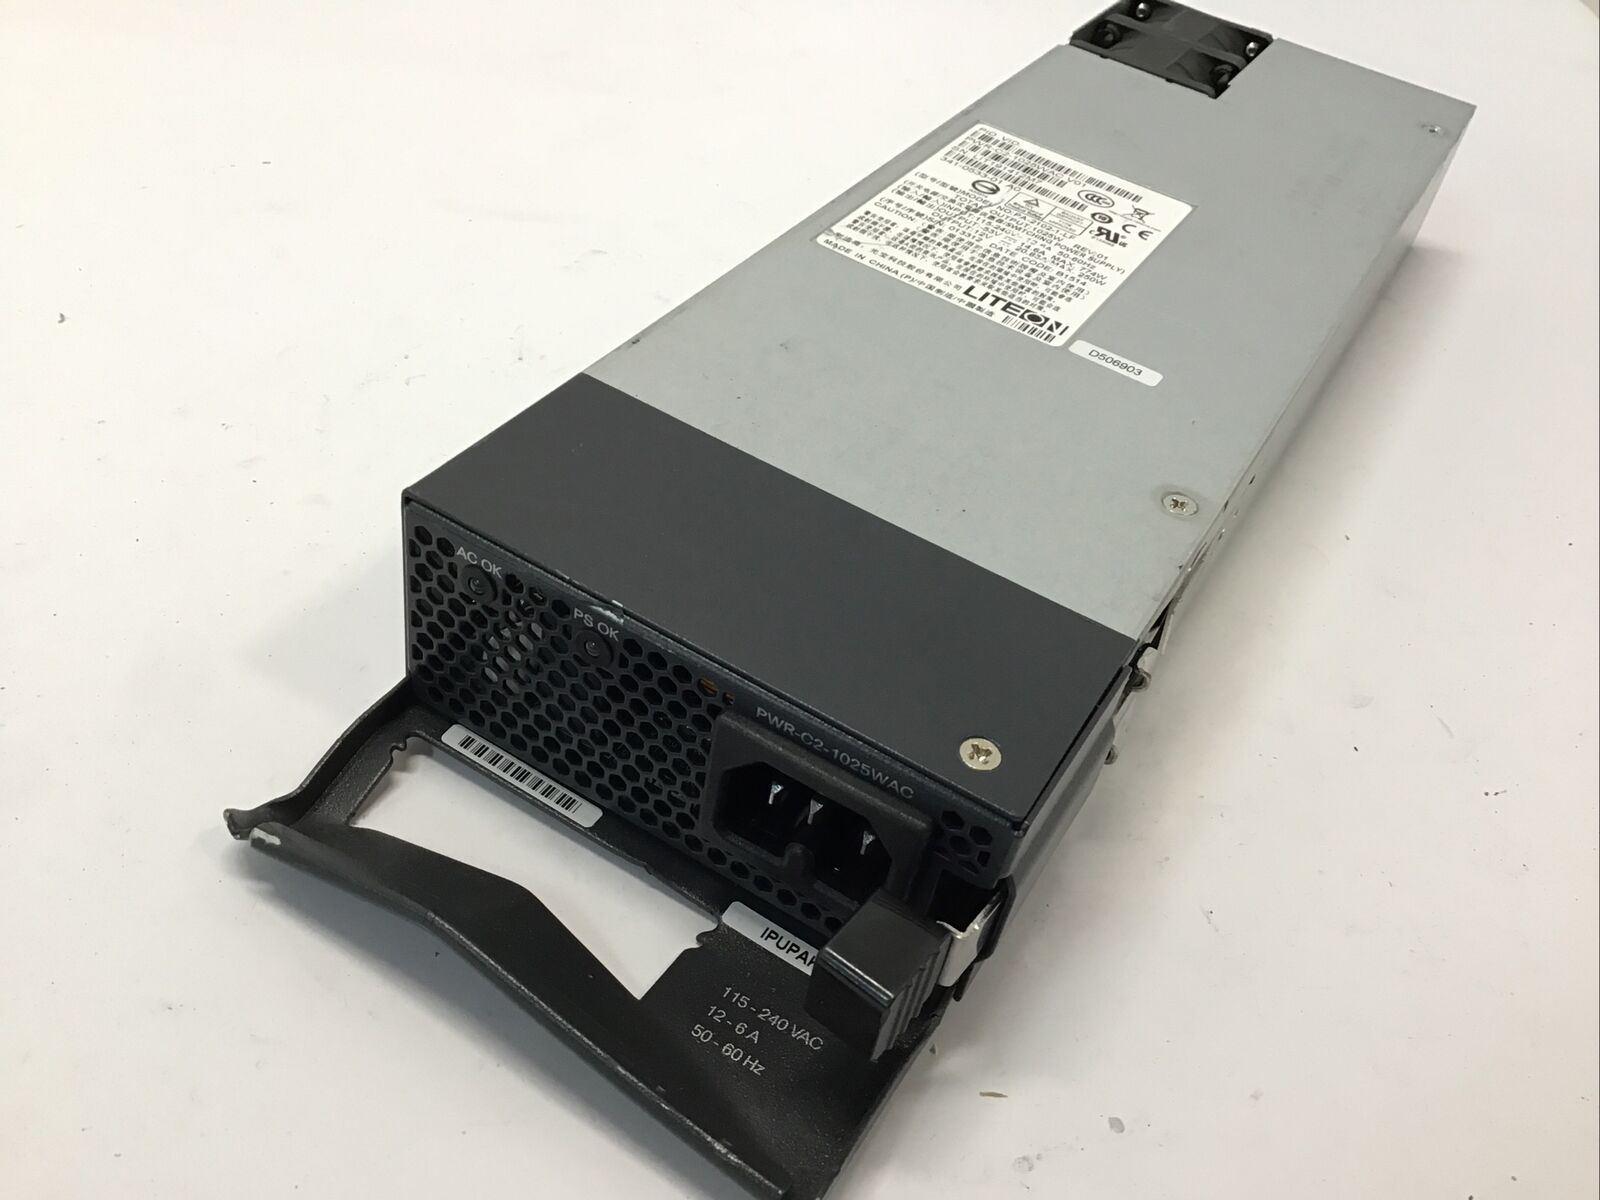 PWR C2 1025WAC DCB2032C2NA 341 0533 02 341 0533 01 PA 2102 1 LF DCJ10252 01 pa 2102 1 lf cisco pa 2102 1 lf 1025 watt ac power supply for cisco catalyst 2960 x